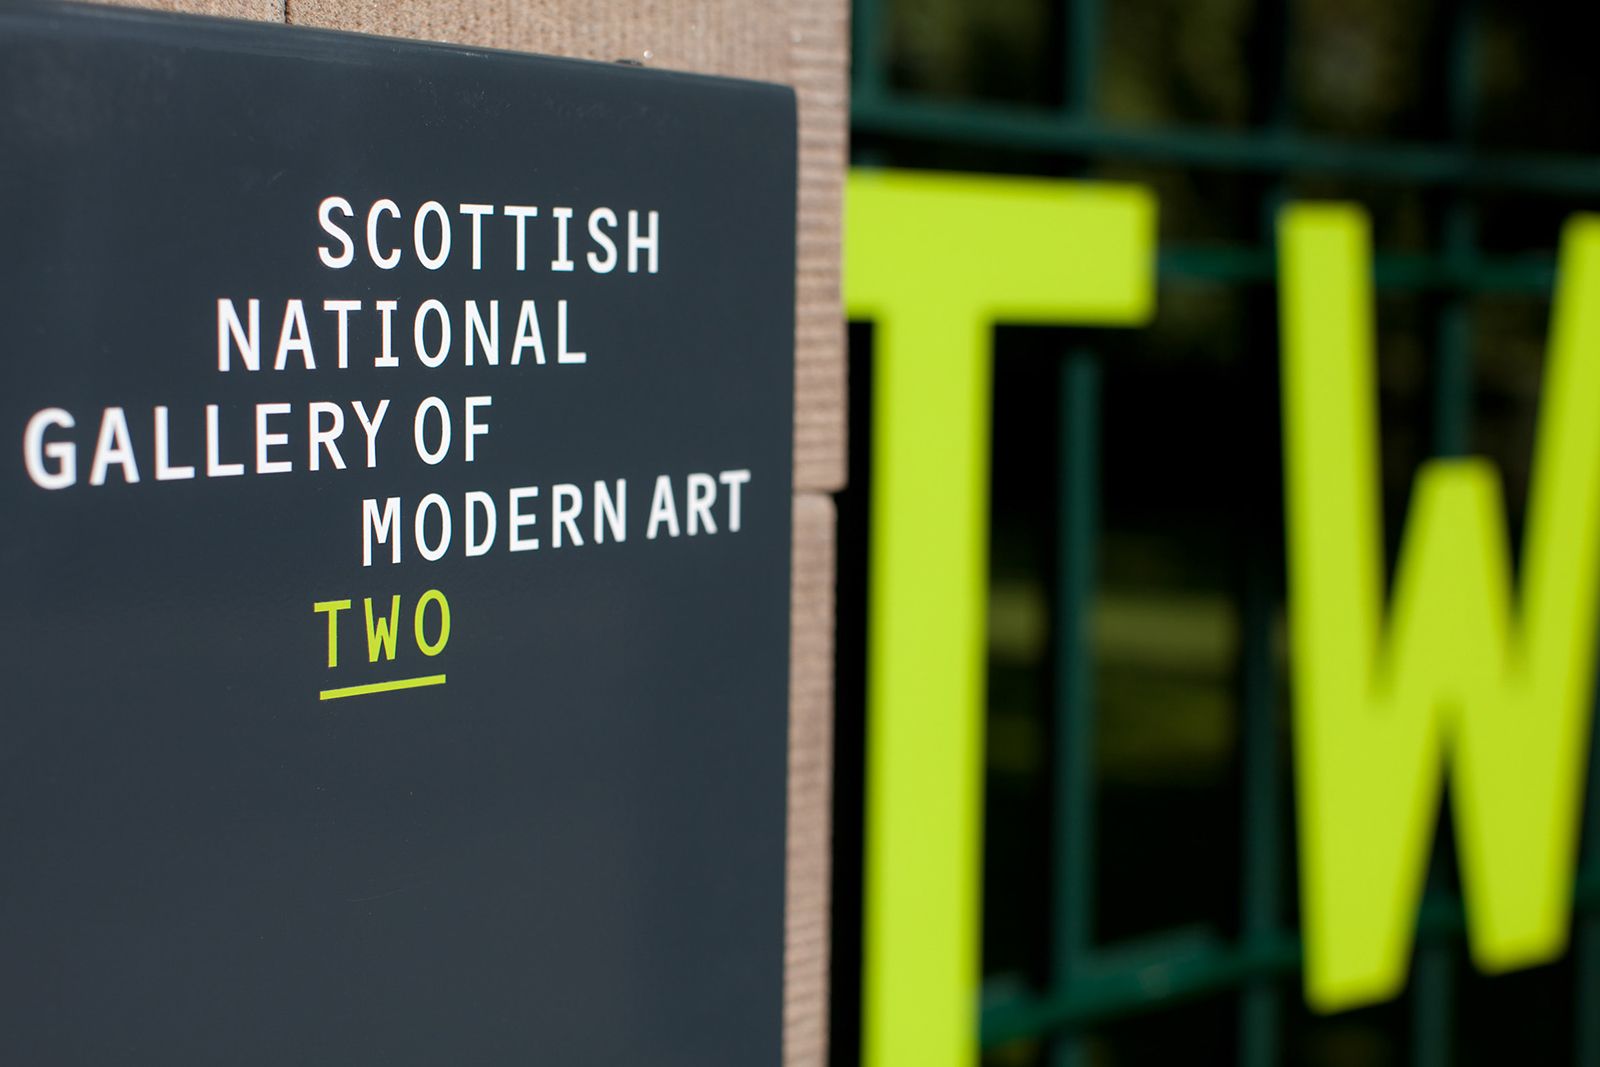 Scottish national gallery of modern art two signage